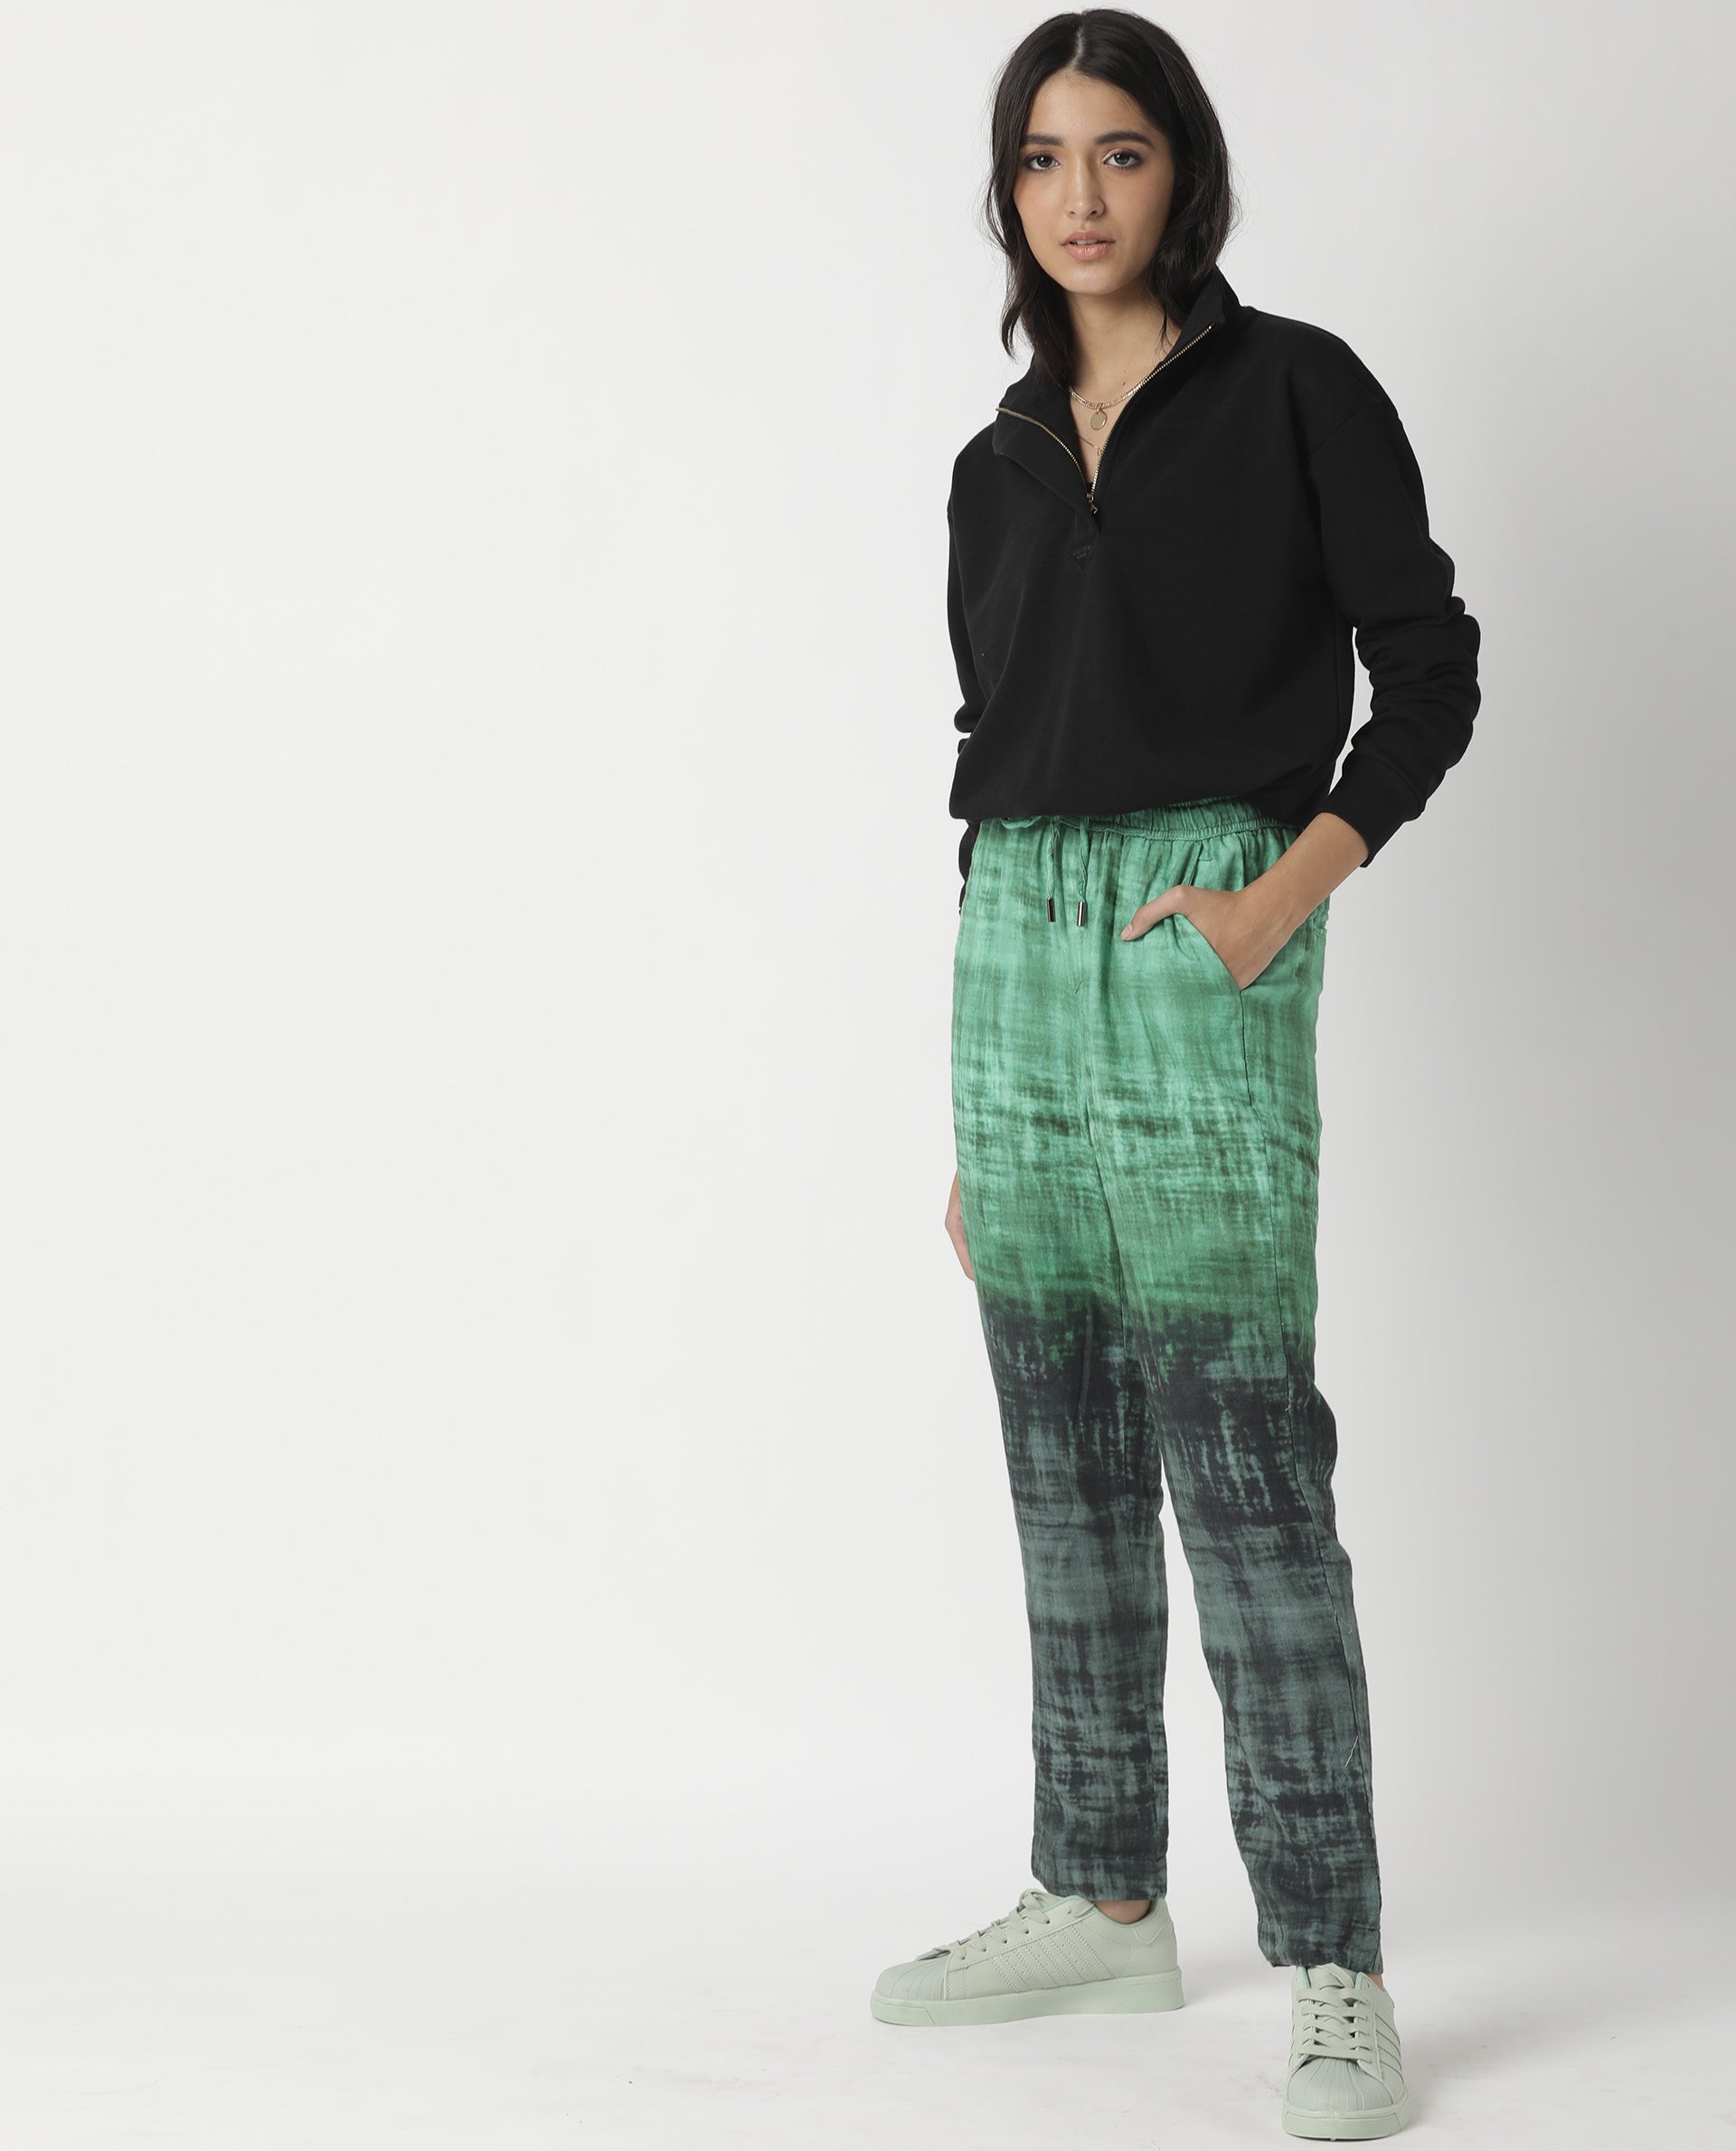 Wide twill trousers - Bright green/Patterned - Ladies | H&M SG